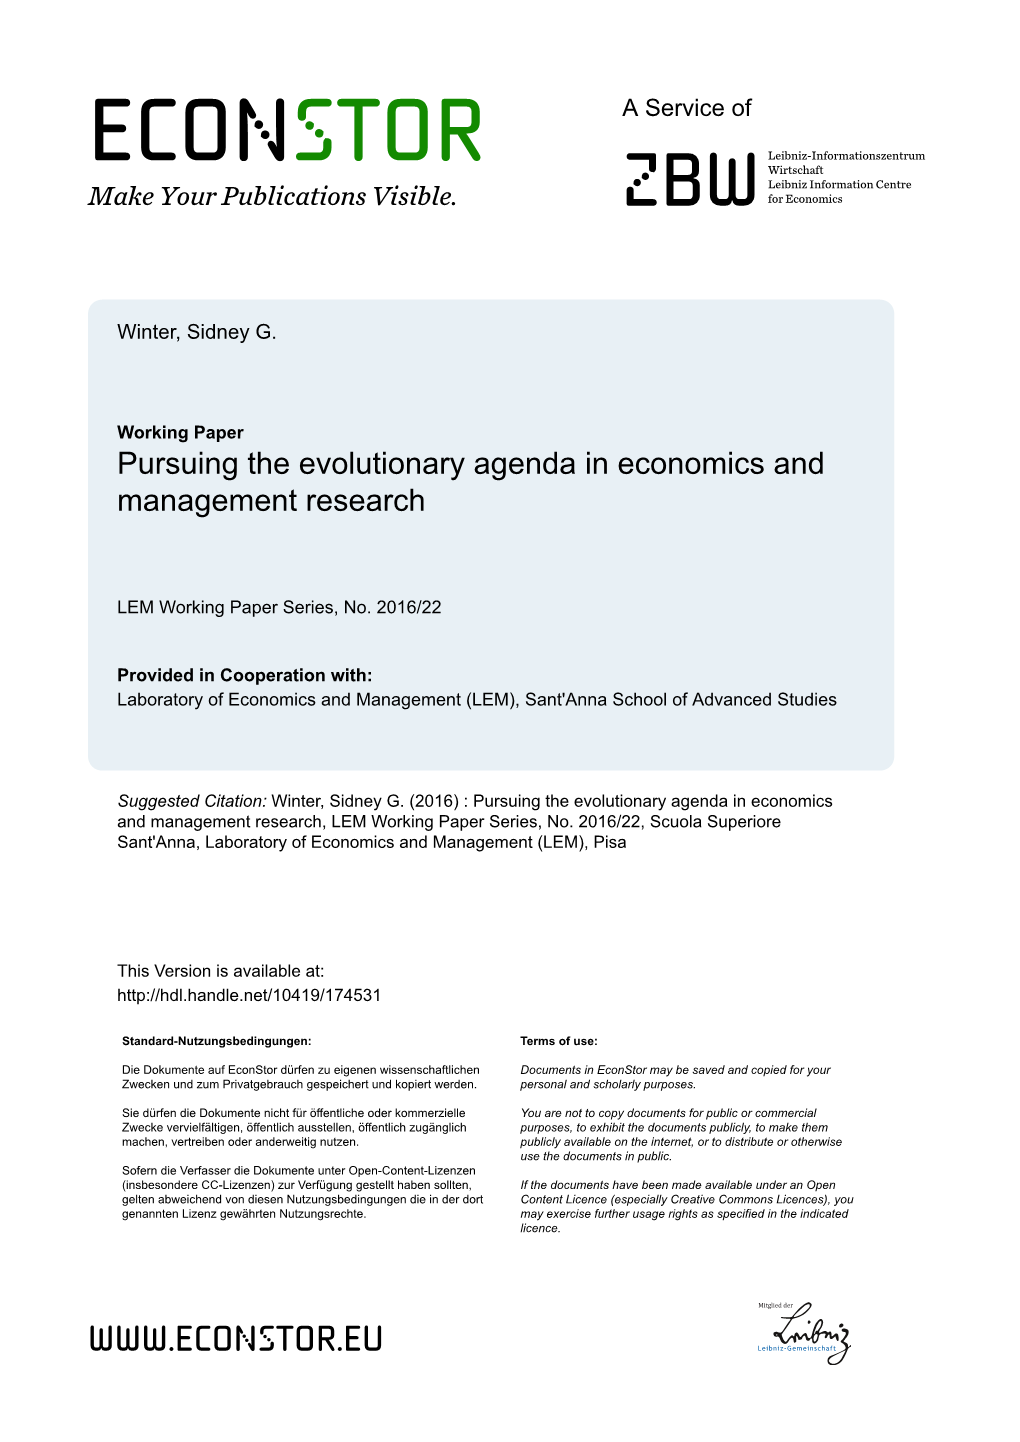 Pursuing the Evolutionary Agenda in Economics and Management Research